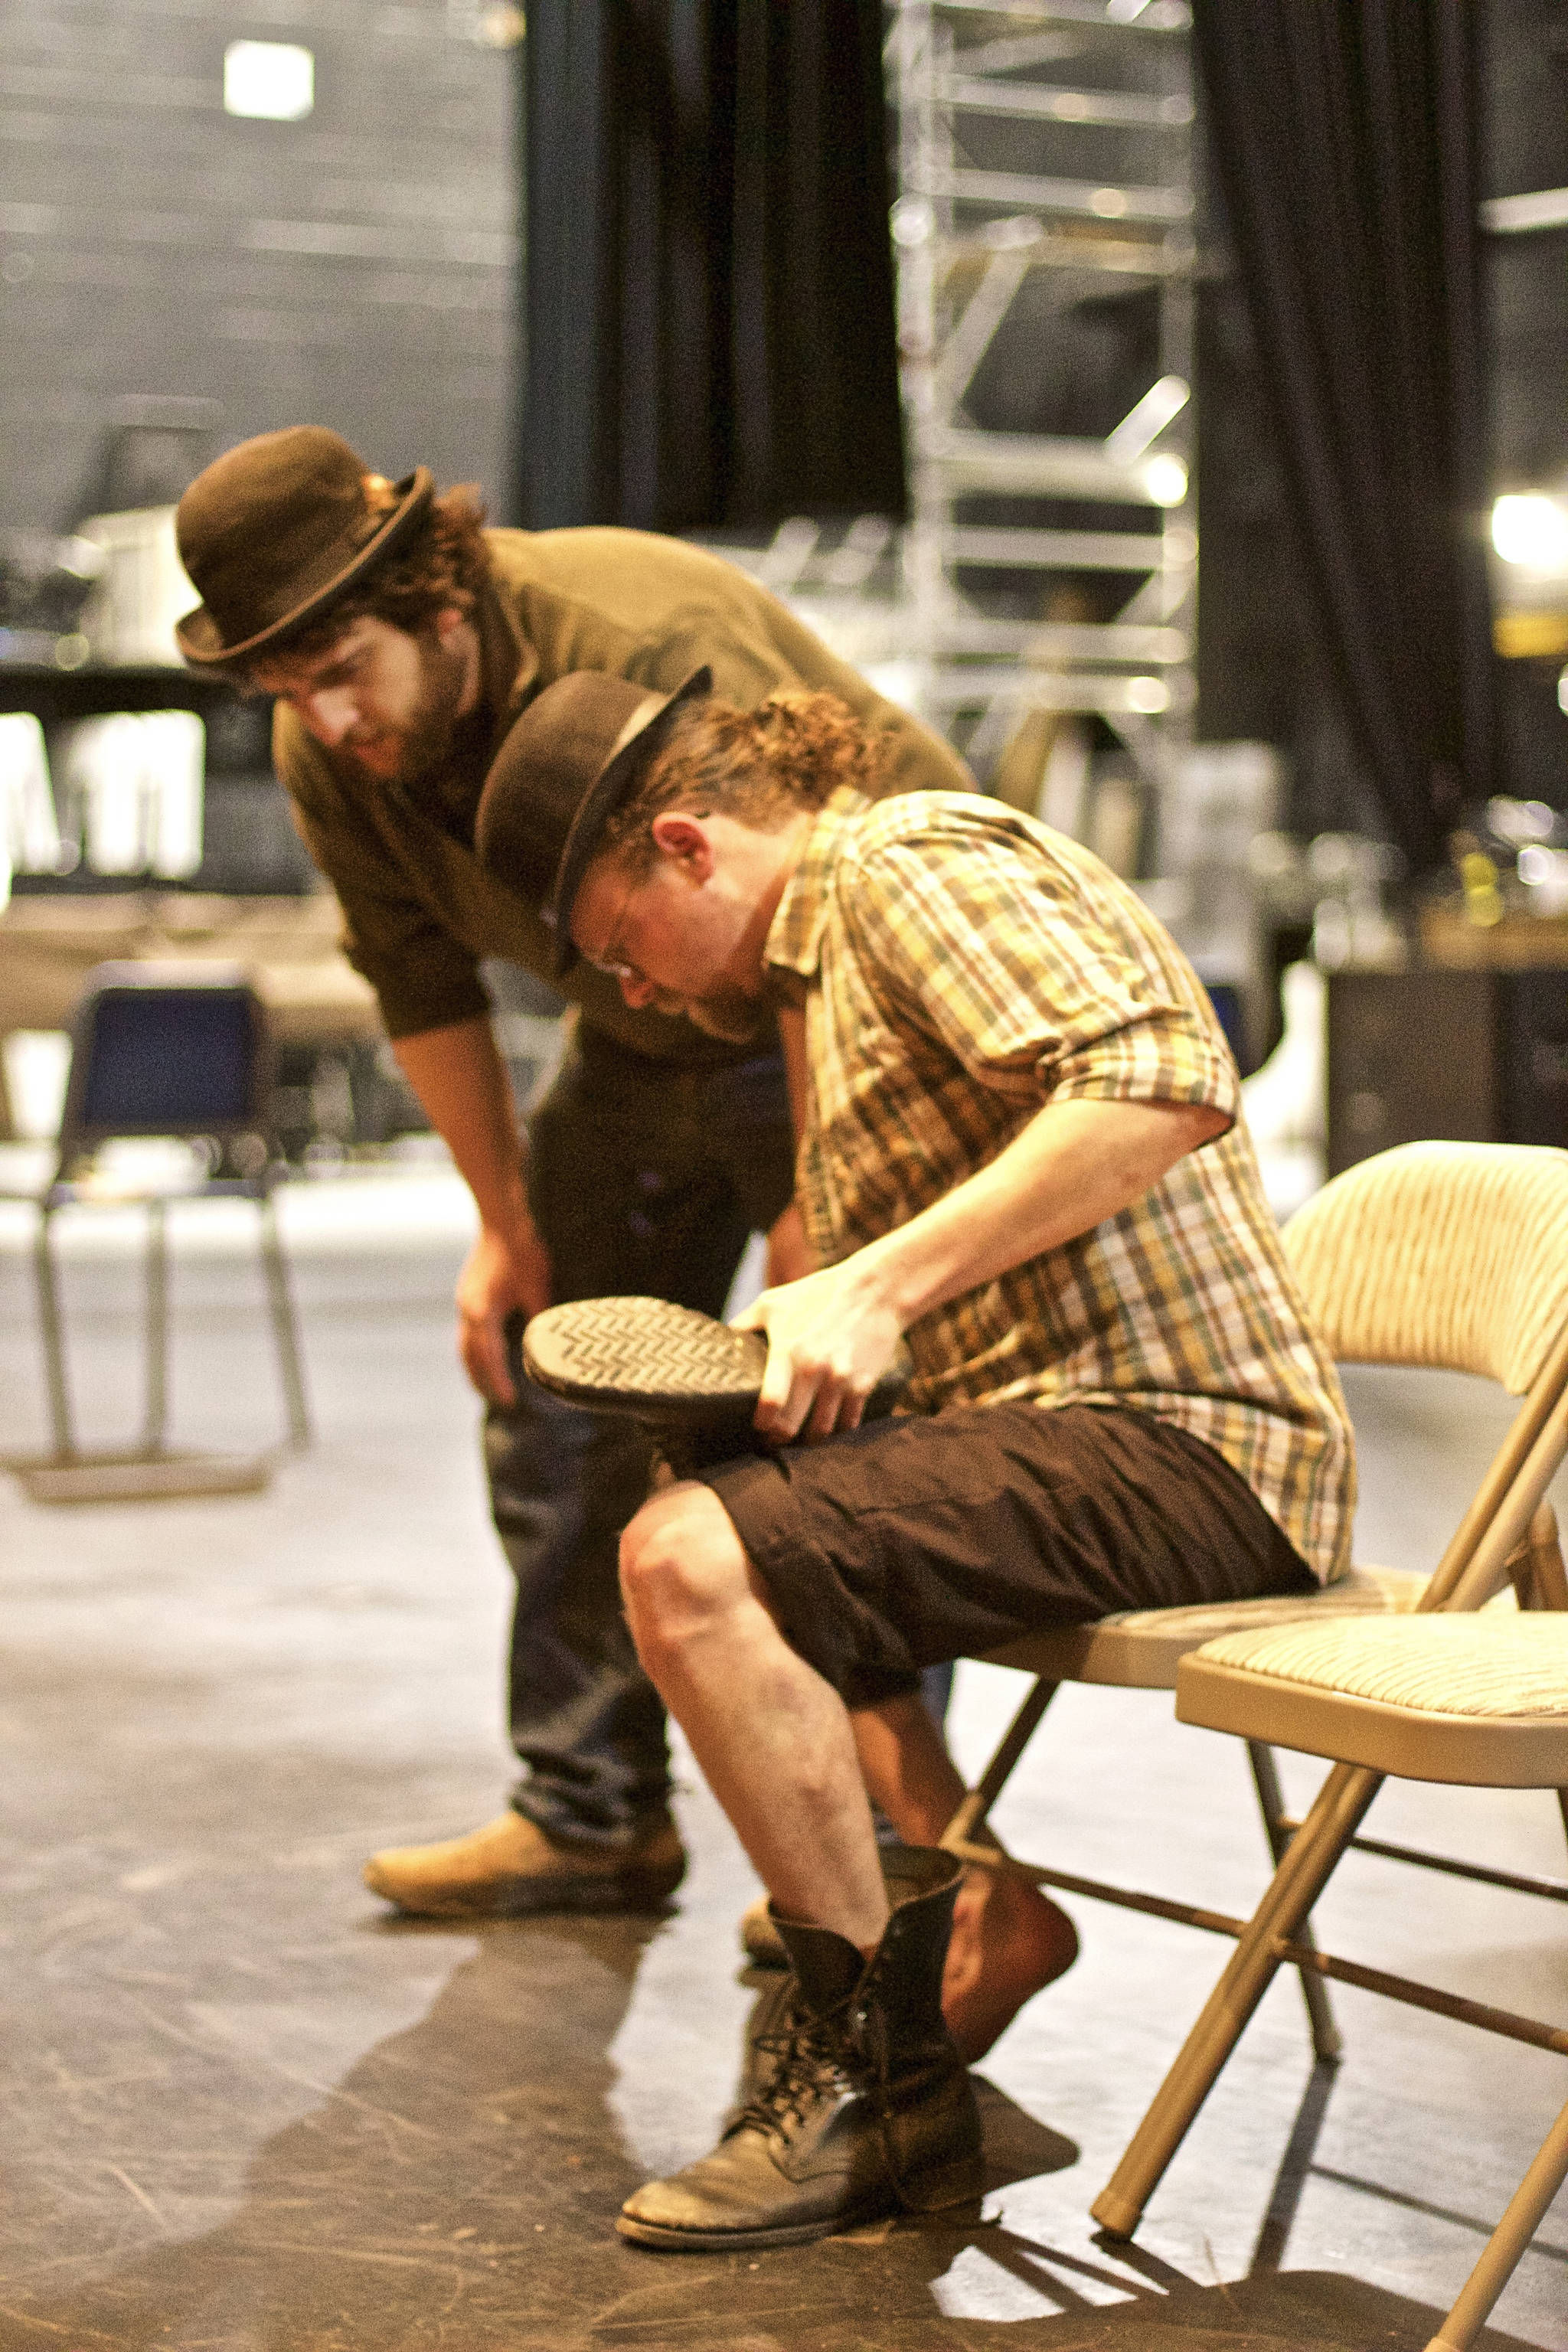 Peter Sheppard, left, and Matt Lees, right practice a scene from Samuel Beckett’s “Waiting for Godot.” Sheppard directs the play, opening at 7 p.m. Friday, May 25, for the start of Pier One Theatre’s 2018 season. (Photo by Richard Rose)